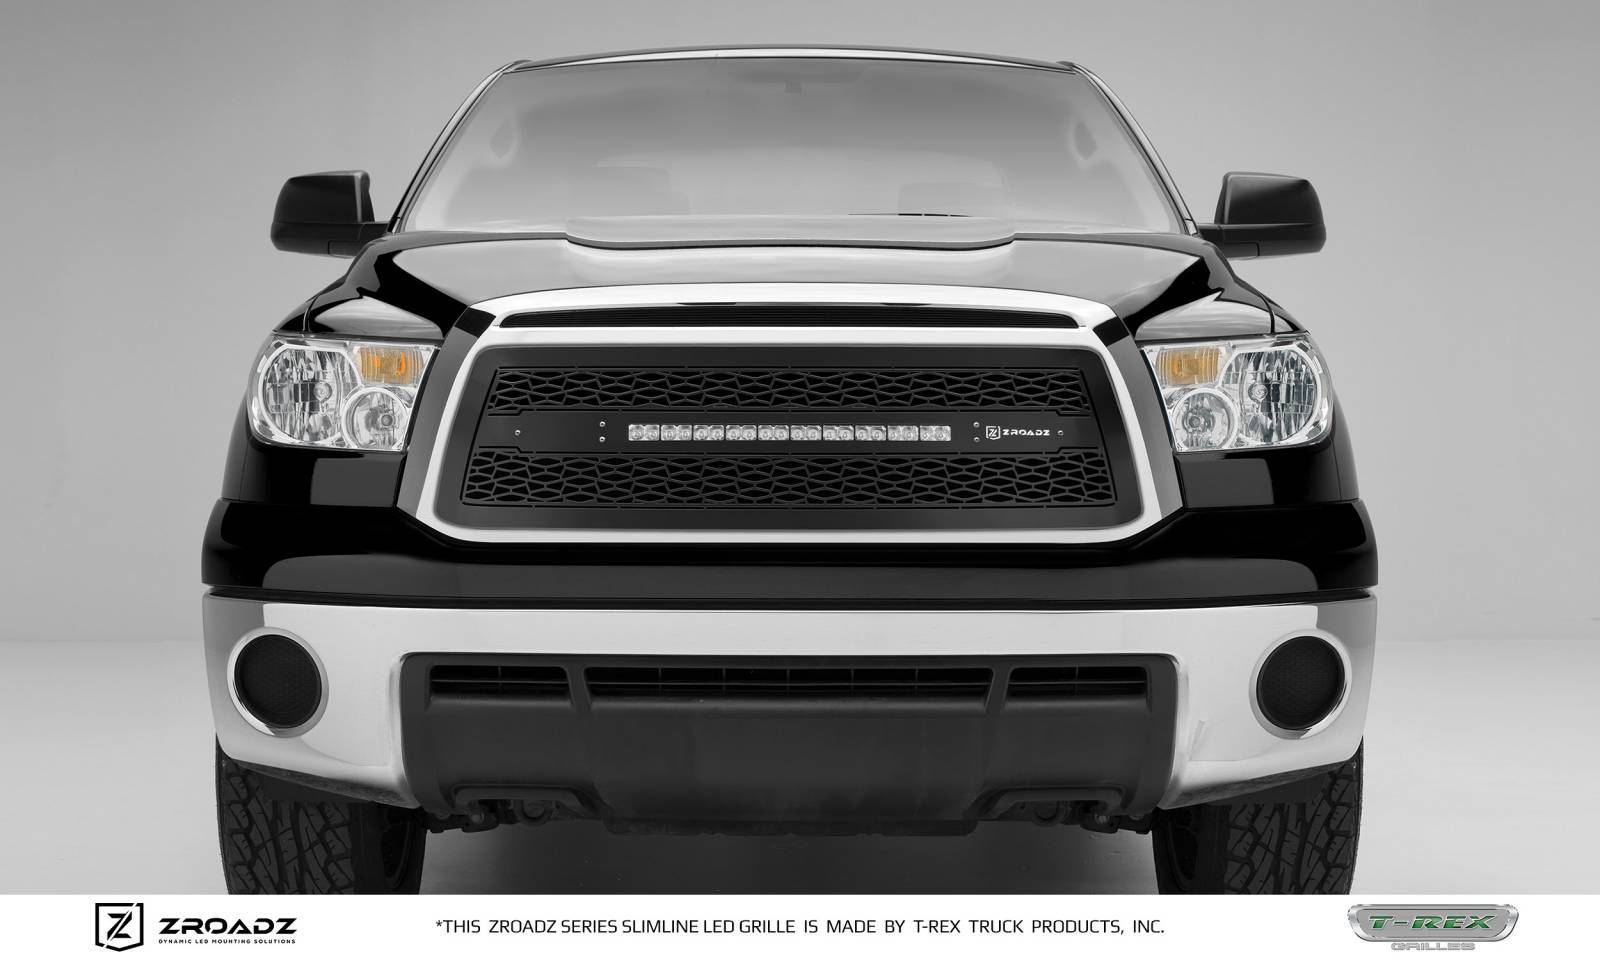 FOR 2010 2011 2012 2013 TOYOTA TUNDRA Billet Grille Grill Combo Inserts 4+3